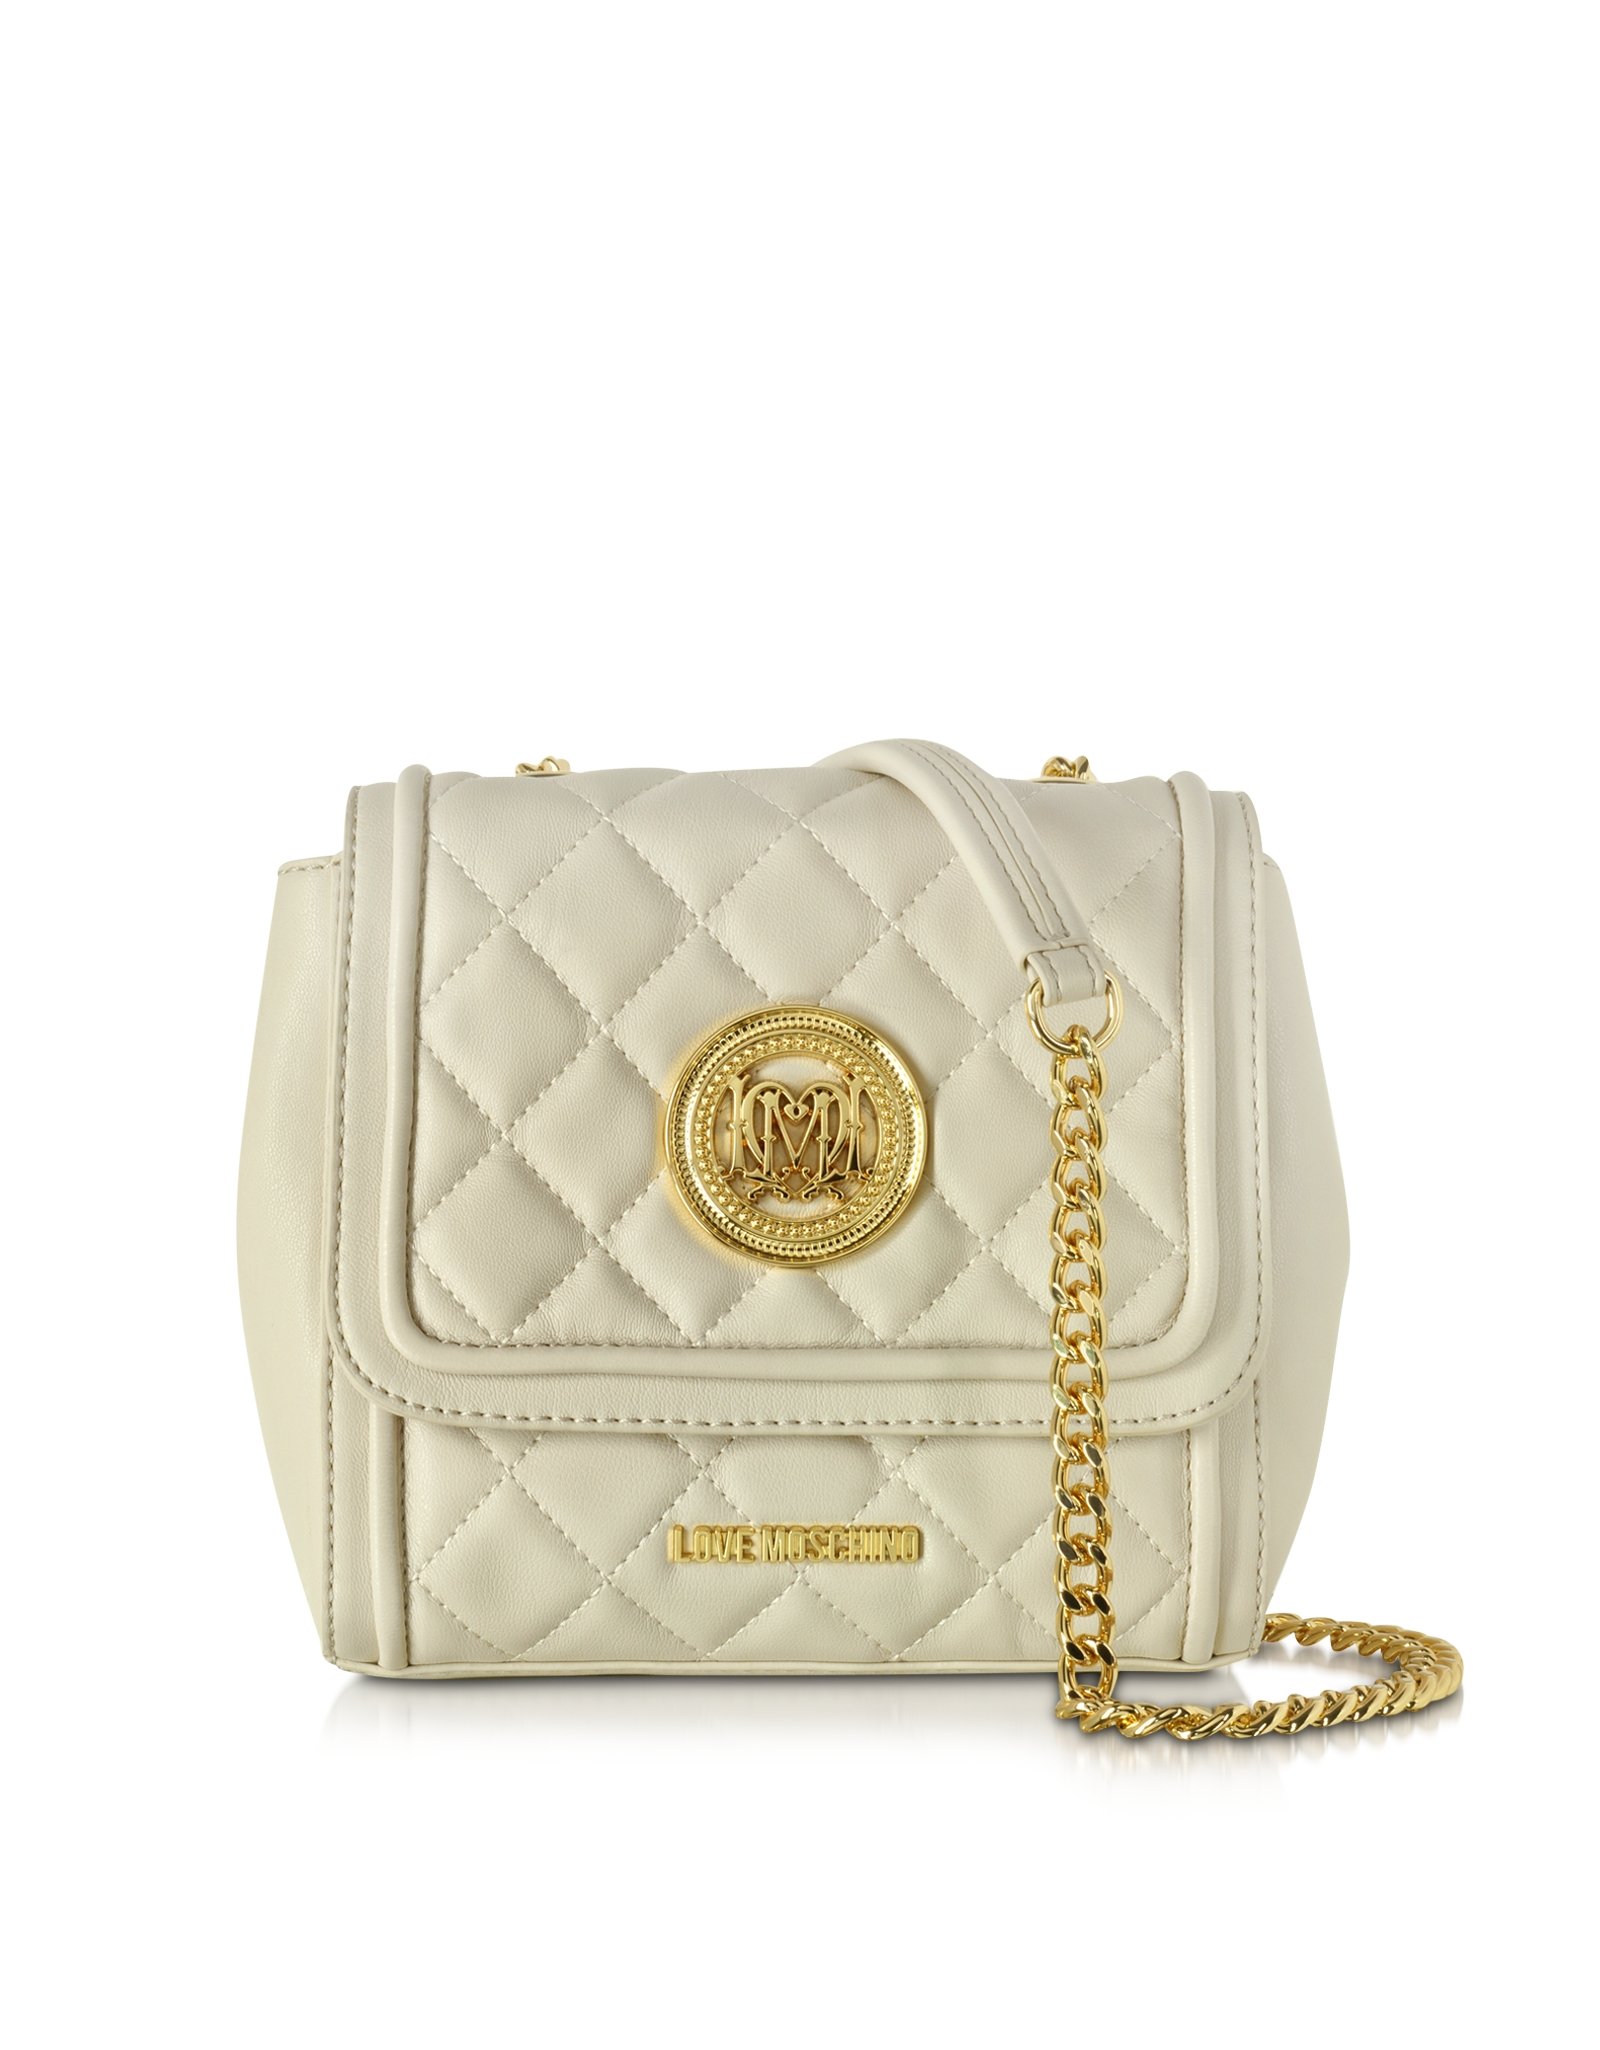 Love Moschino Small Quilted Eco Leather Crossbody Bag in White - Lyst